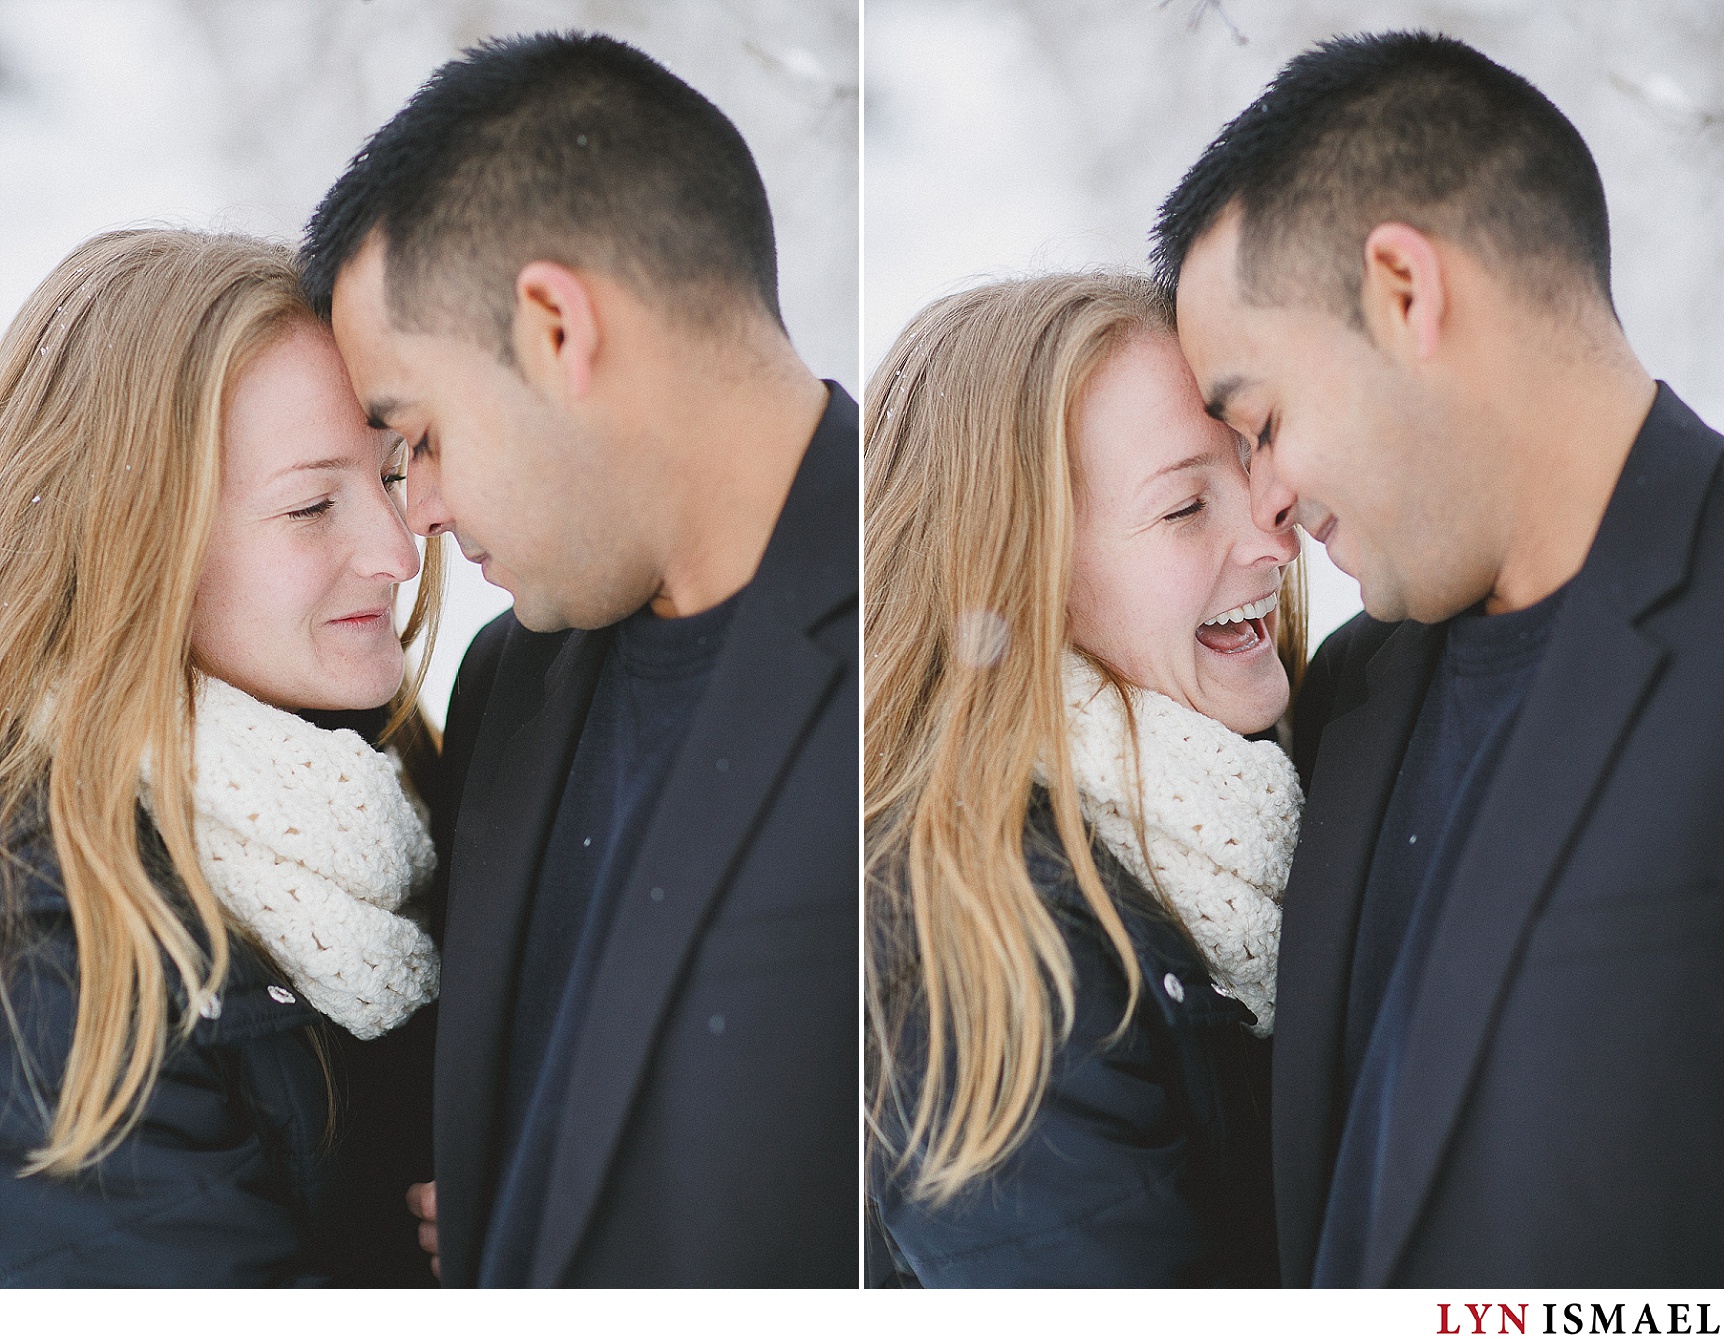 Engagement portrait done in Schomberg in the winter.